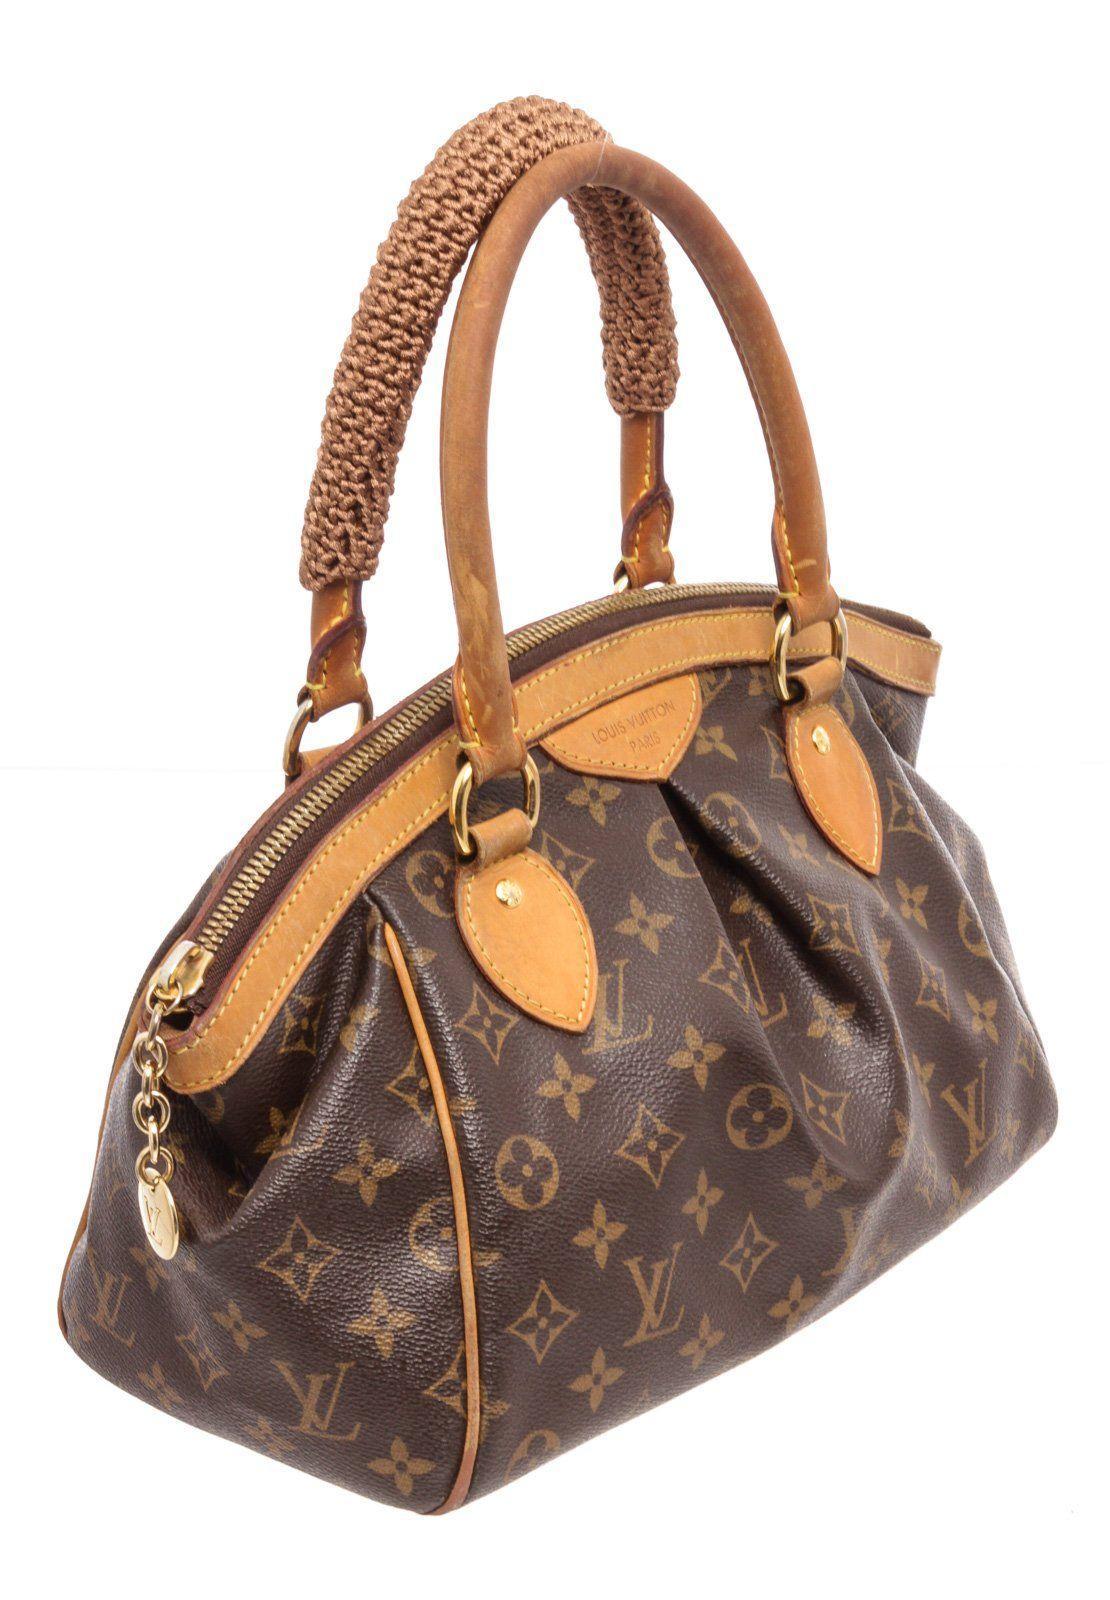 Louis Vuitton Brown Monogram Tivoli PM Satchel Bag with gold-tone hardware, leather trim, rolled handles, canvas lining & dual interior pockets, zip closure.

30355MSC
MEASUREMENTS:
 Length 4.5 in / 11 cm
 Width 13 in / 33 cm
 Height 8.75 in / 22